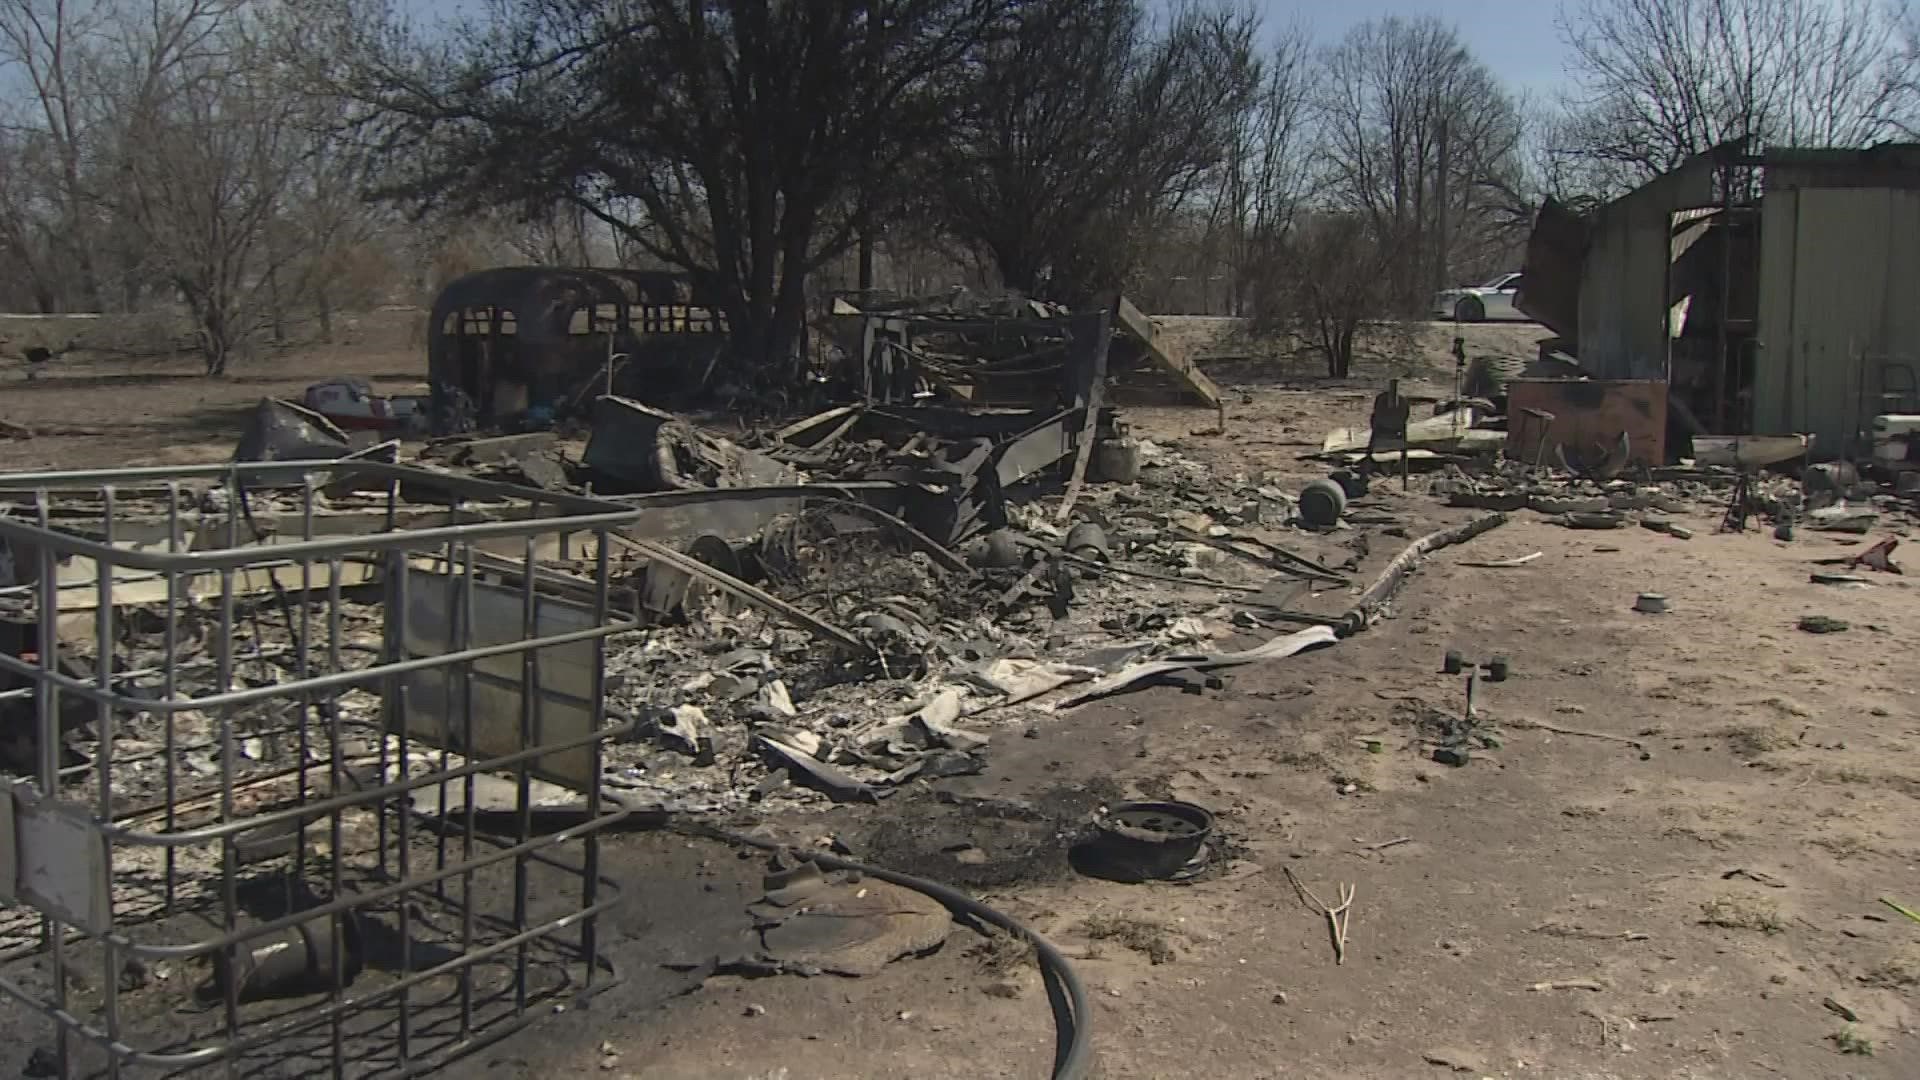 Multiple wildfires throughout Eastland County have burned tens of thousands of acres and destroyed homes.